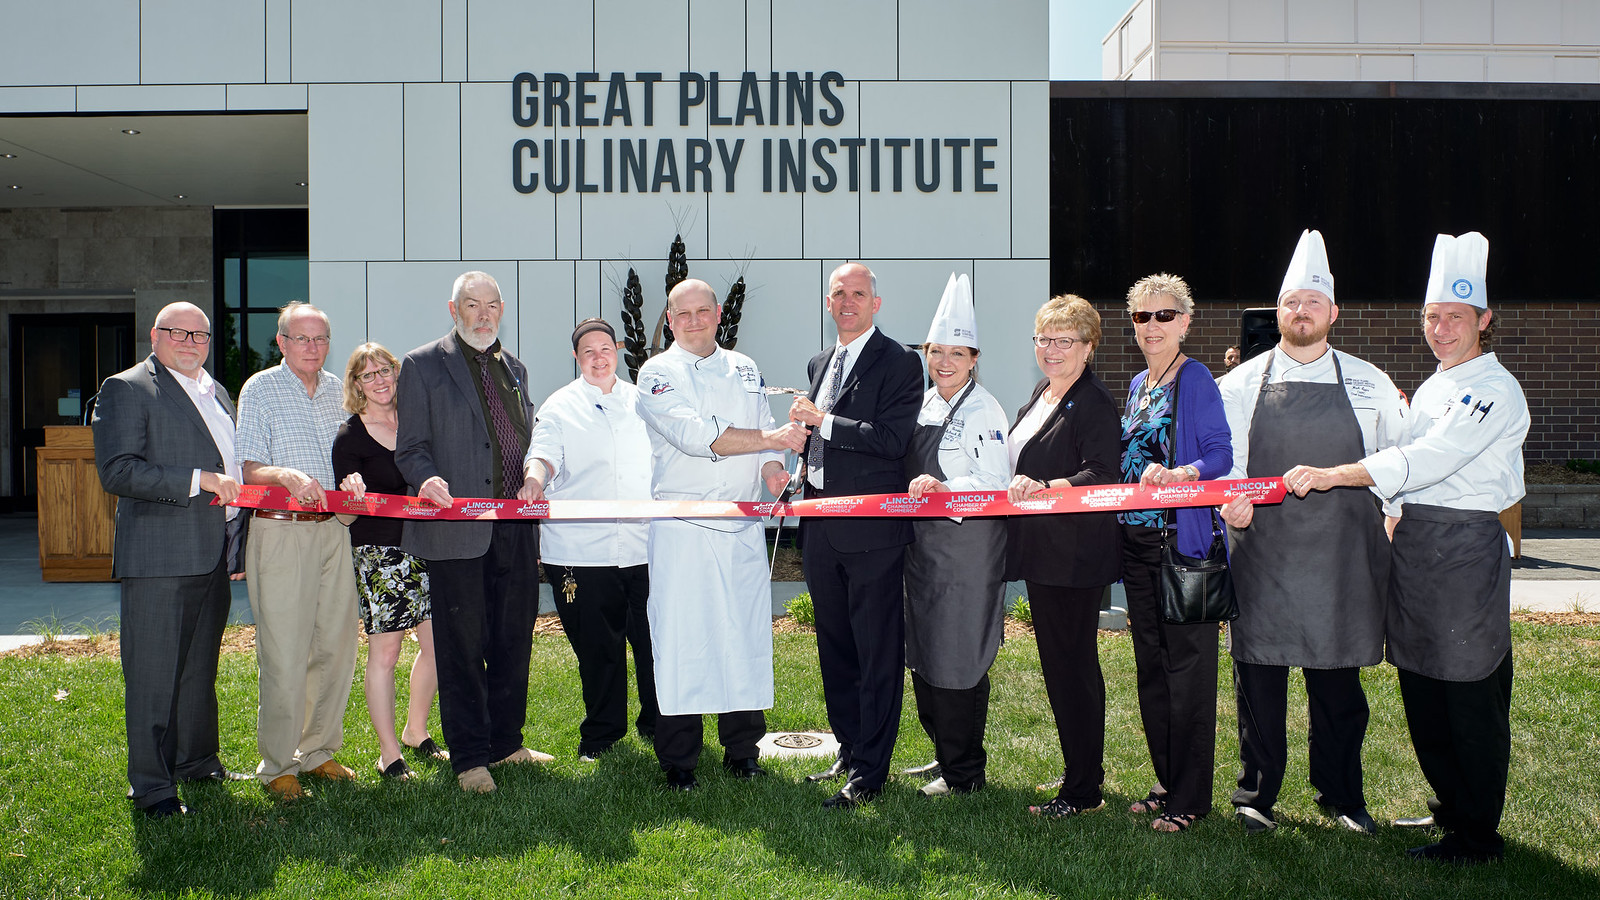 Great Plains Culinary Institute Ribbon-cutting May 17, 2018